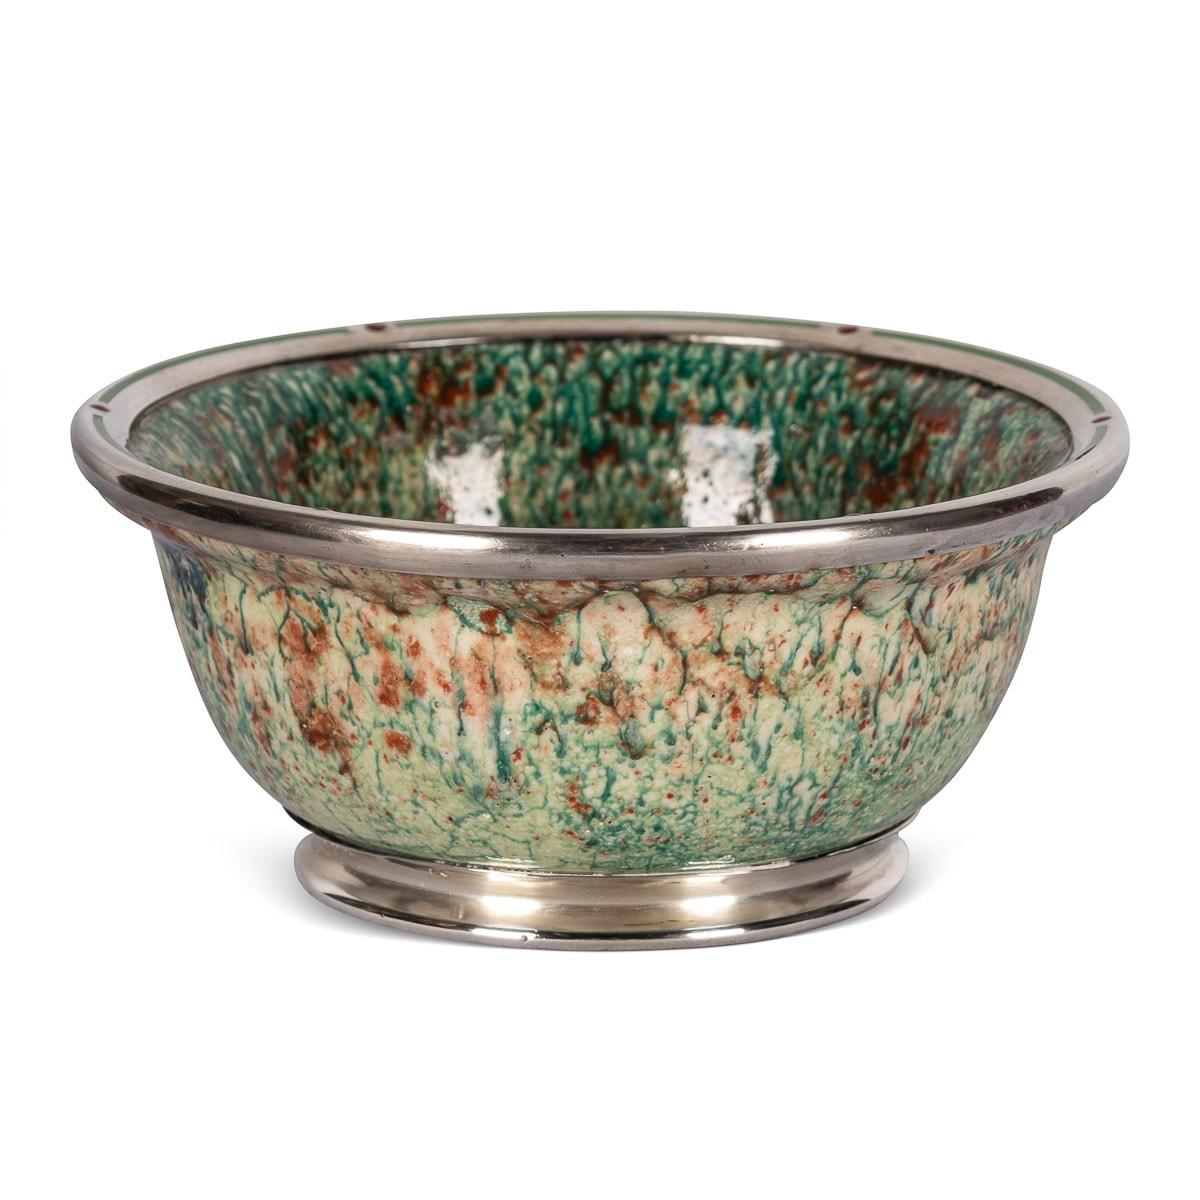 20th Century French Flambé Glaze Pottery & Silver Mounted Bowl, c.1900 For Sale 2